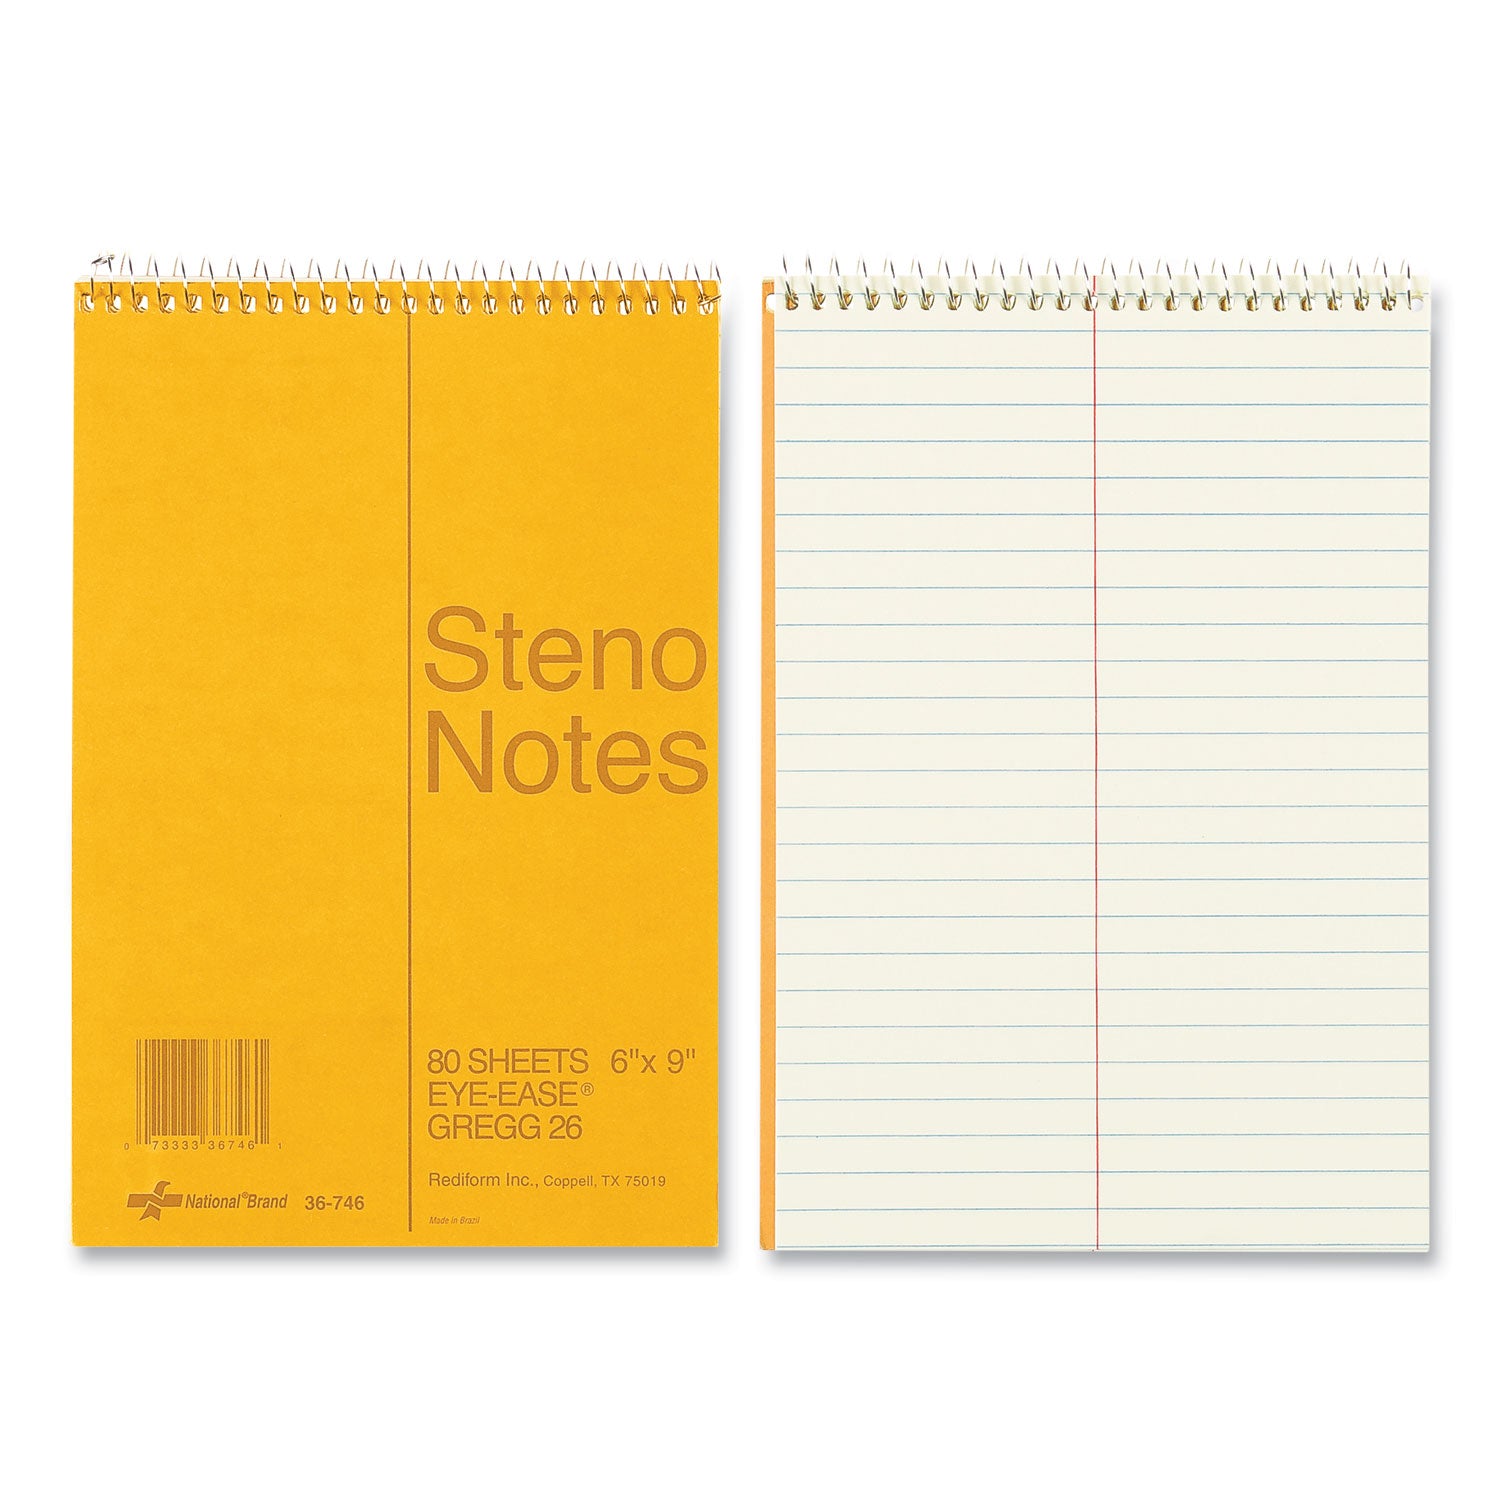 Standard Spiral Steno Pad, Gregg Rule, Brown Cover, 80 Eye-Ease Green 6 x 9 Sheets - 